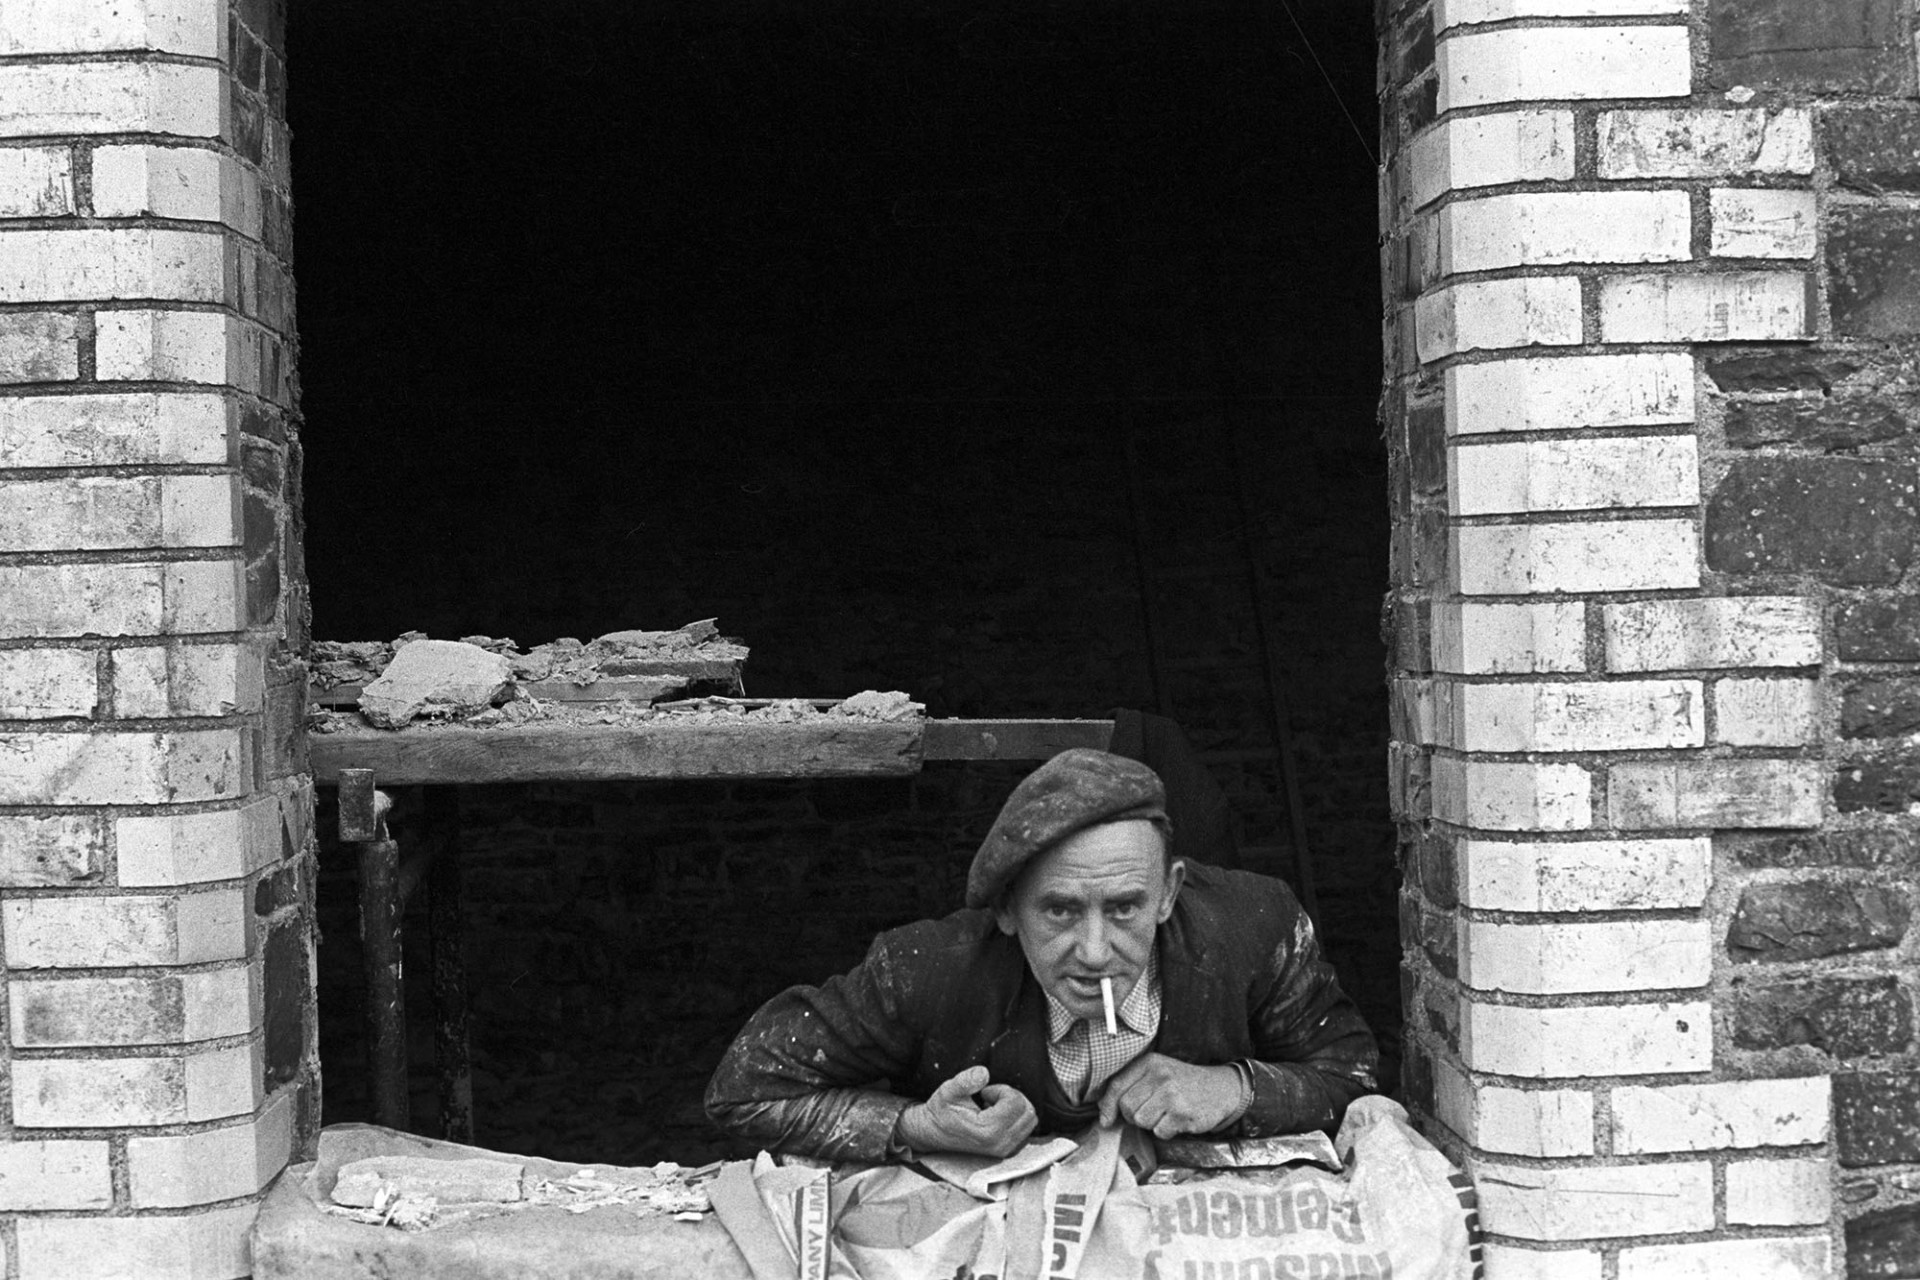 Builder with cigarette looking out of window.
[Argo Pickard smoking a cigarette and looking out of a window in a building he's converting from a stable into a house at Barlands, Dolton.]